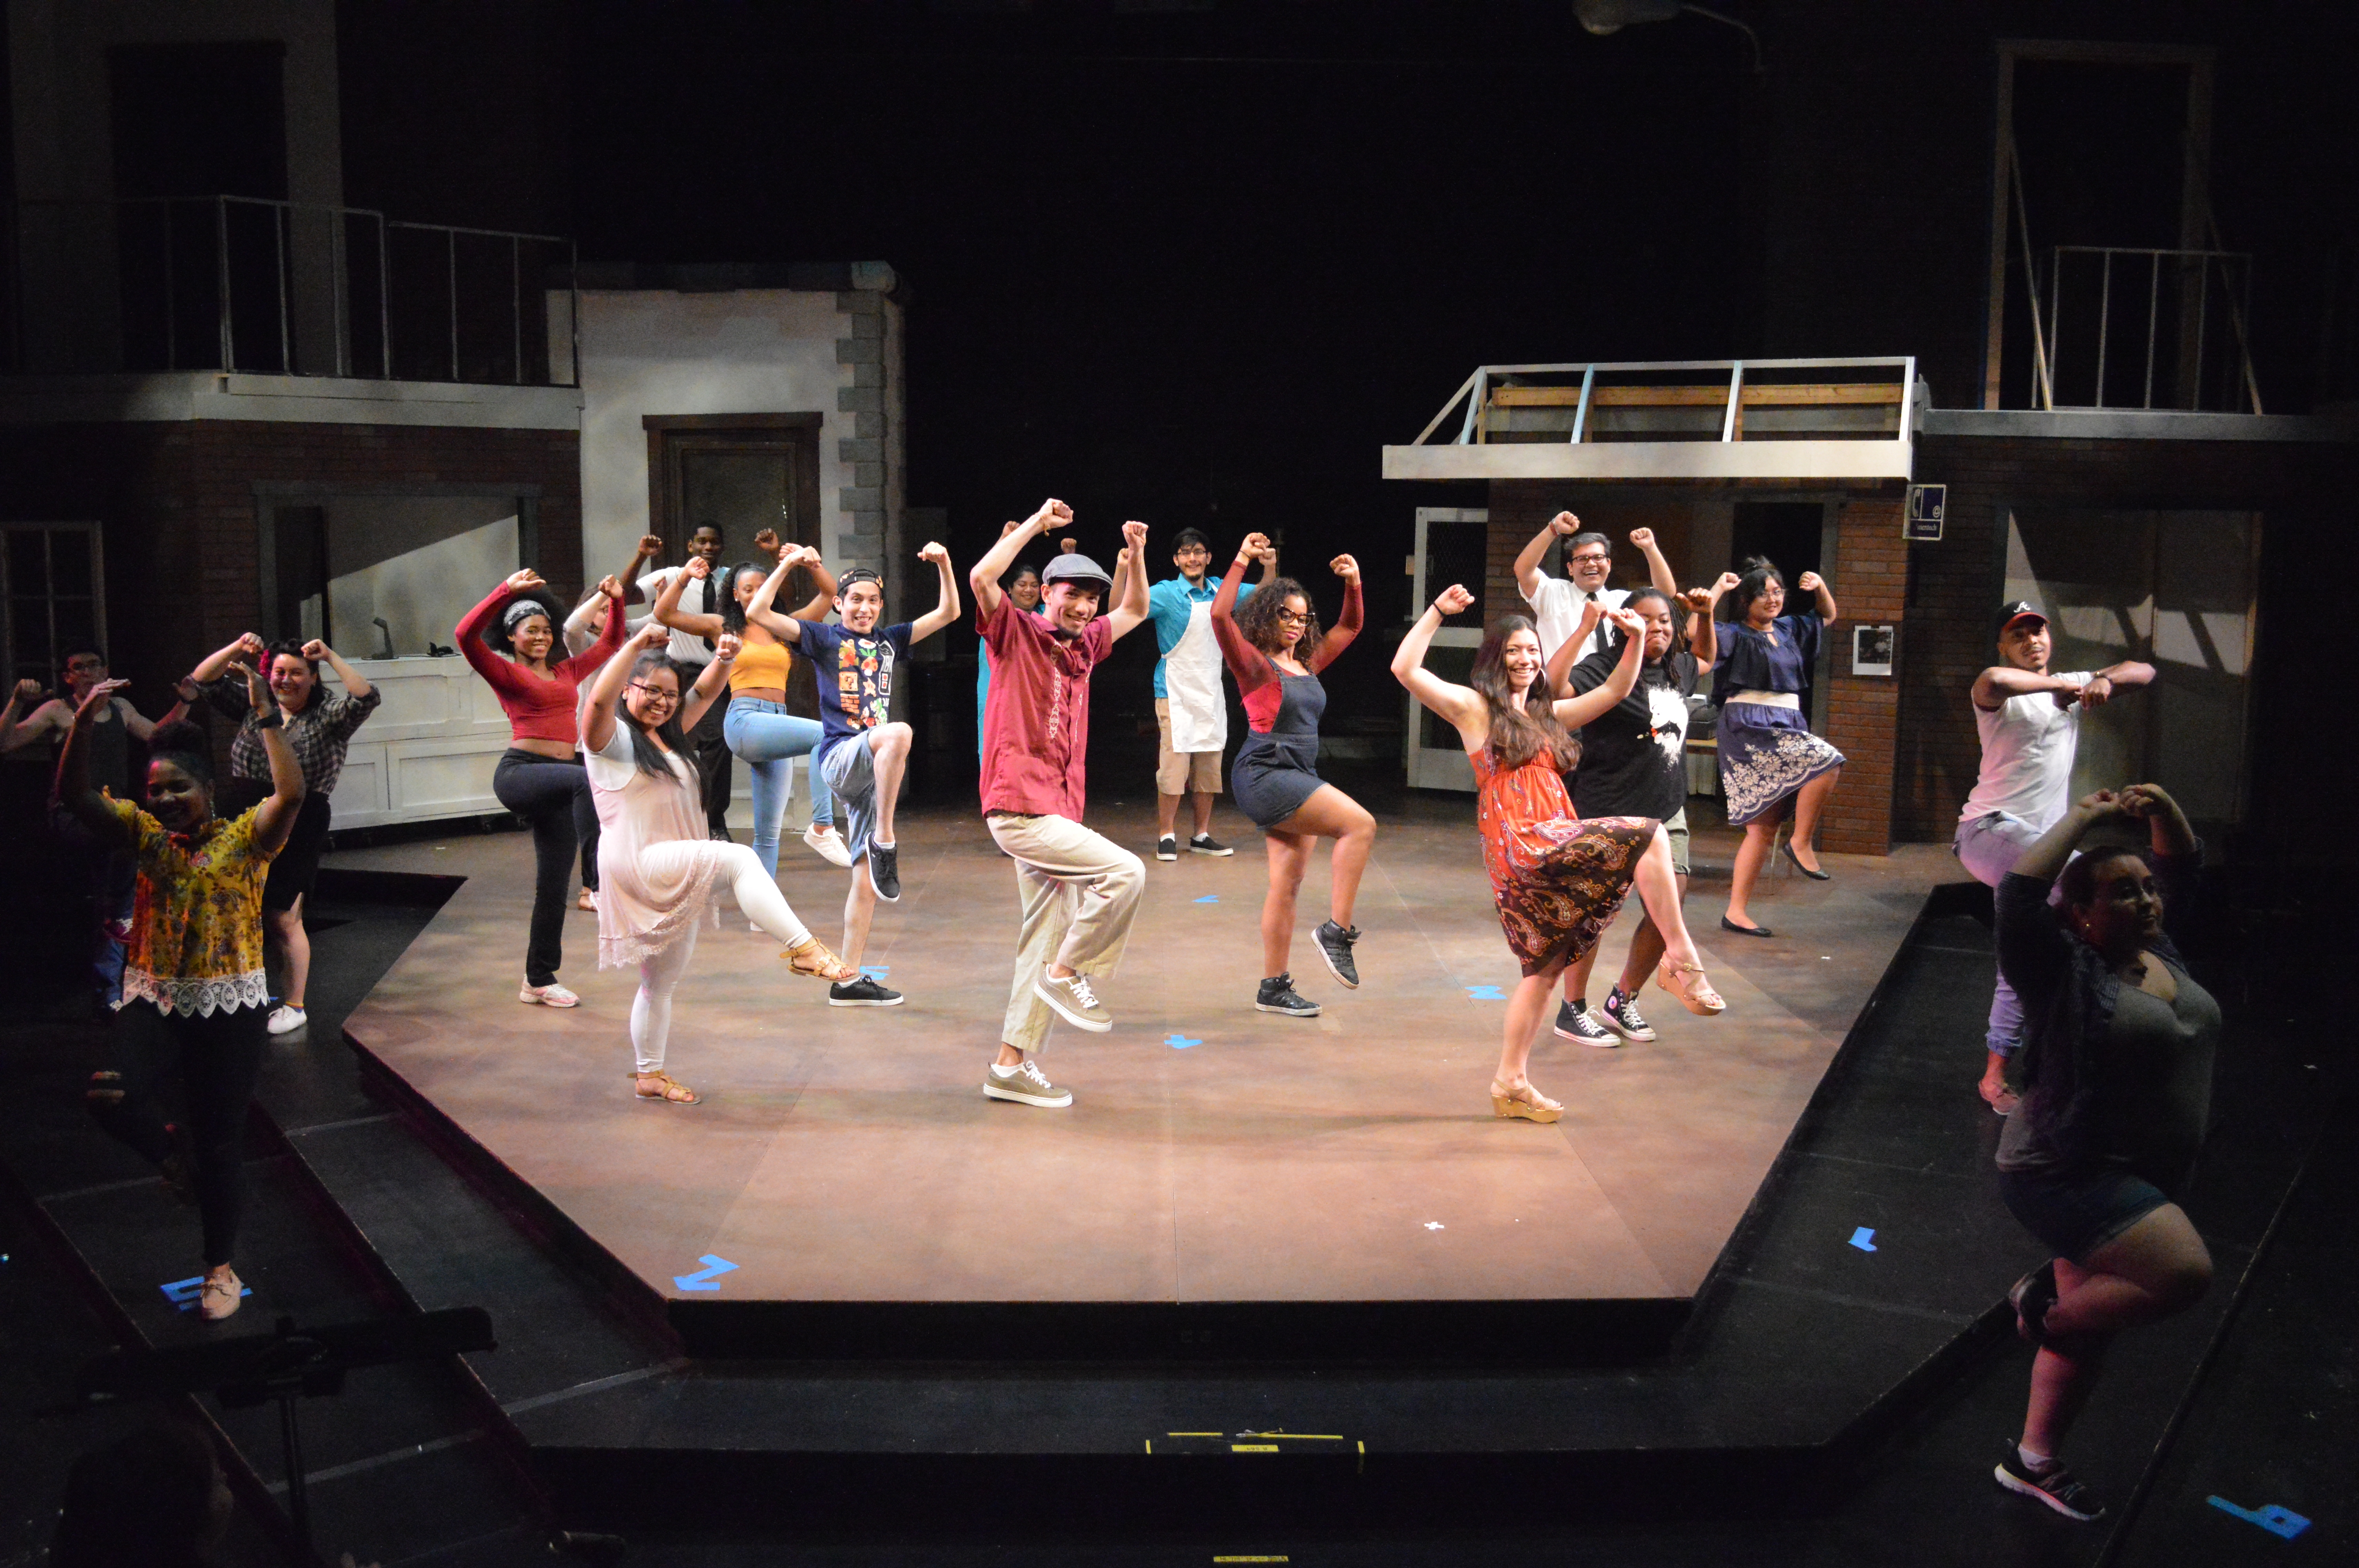 Review: Kalamazoo College makes an impression with ‘In the Heights’